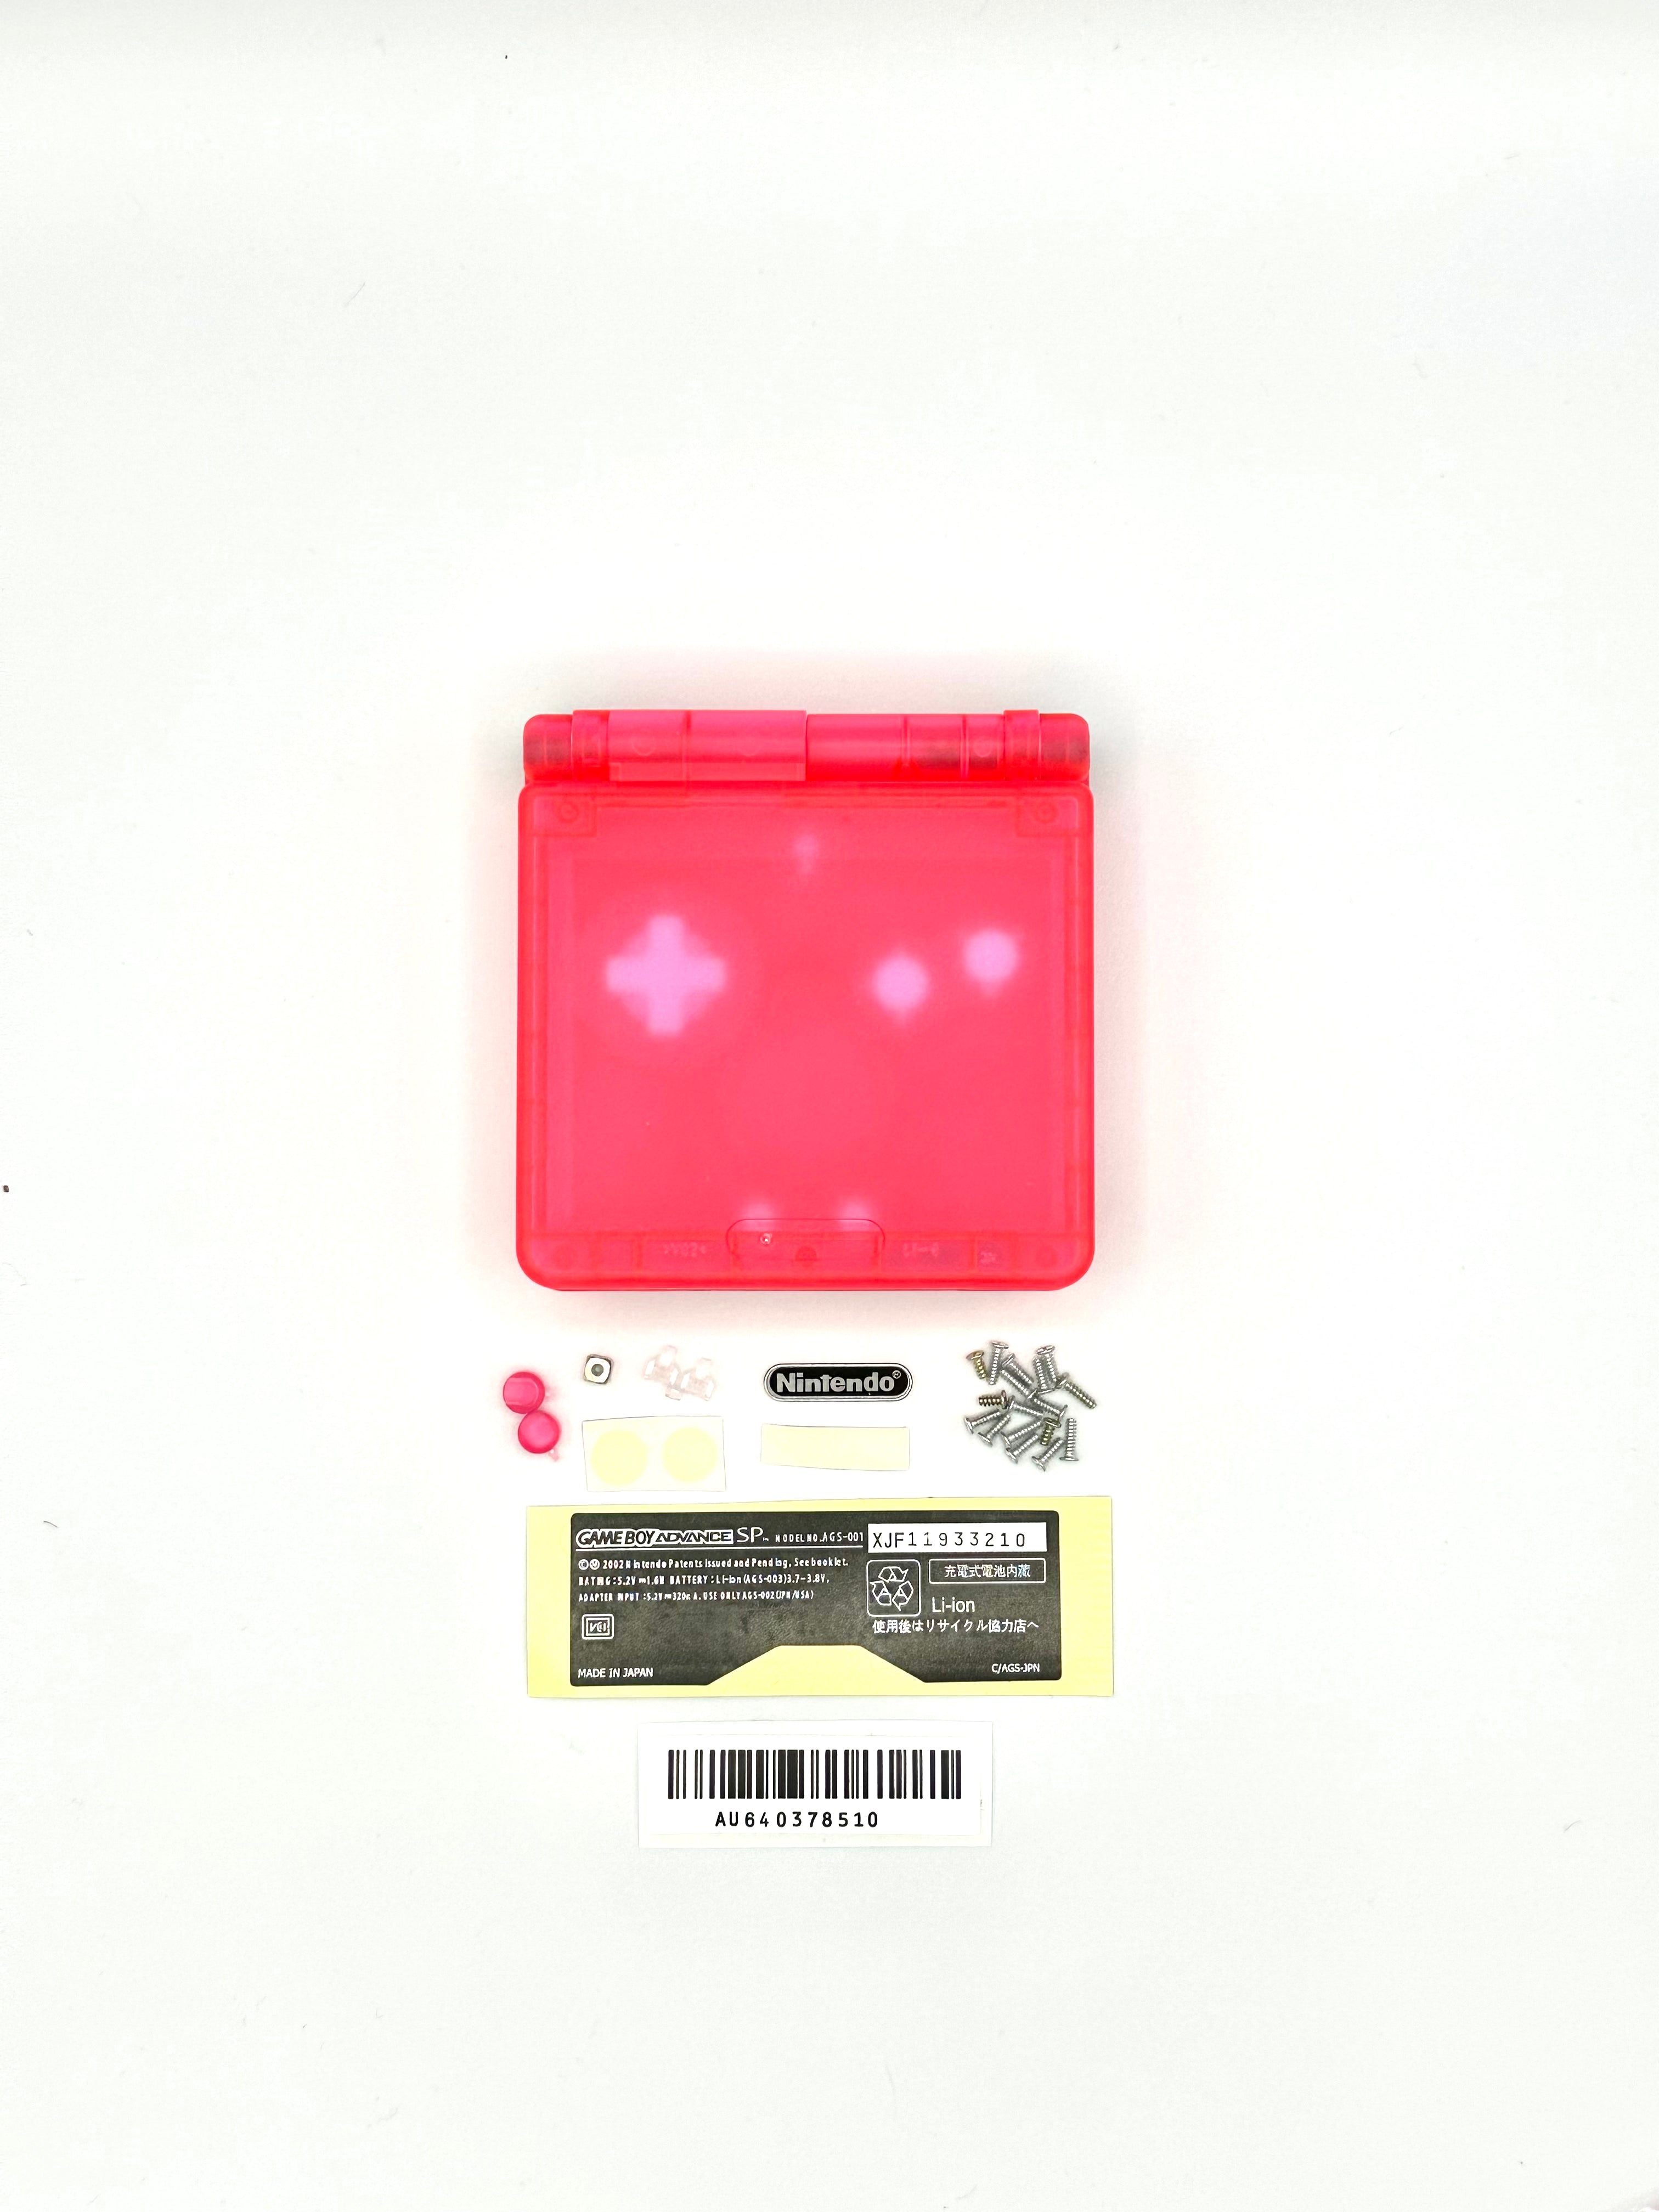 Nintendo Gameboy Advance SP Shell Clear Pink